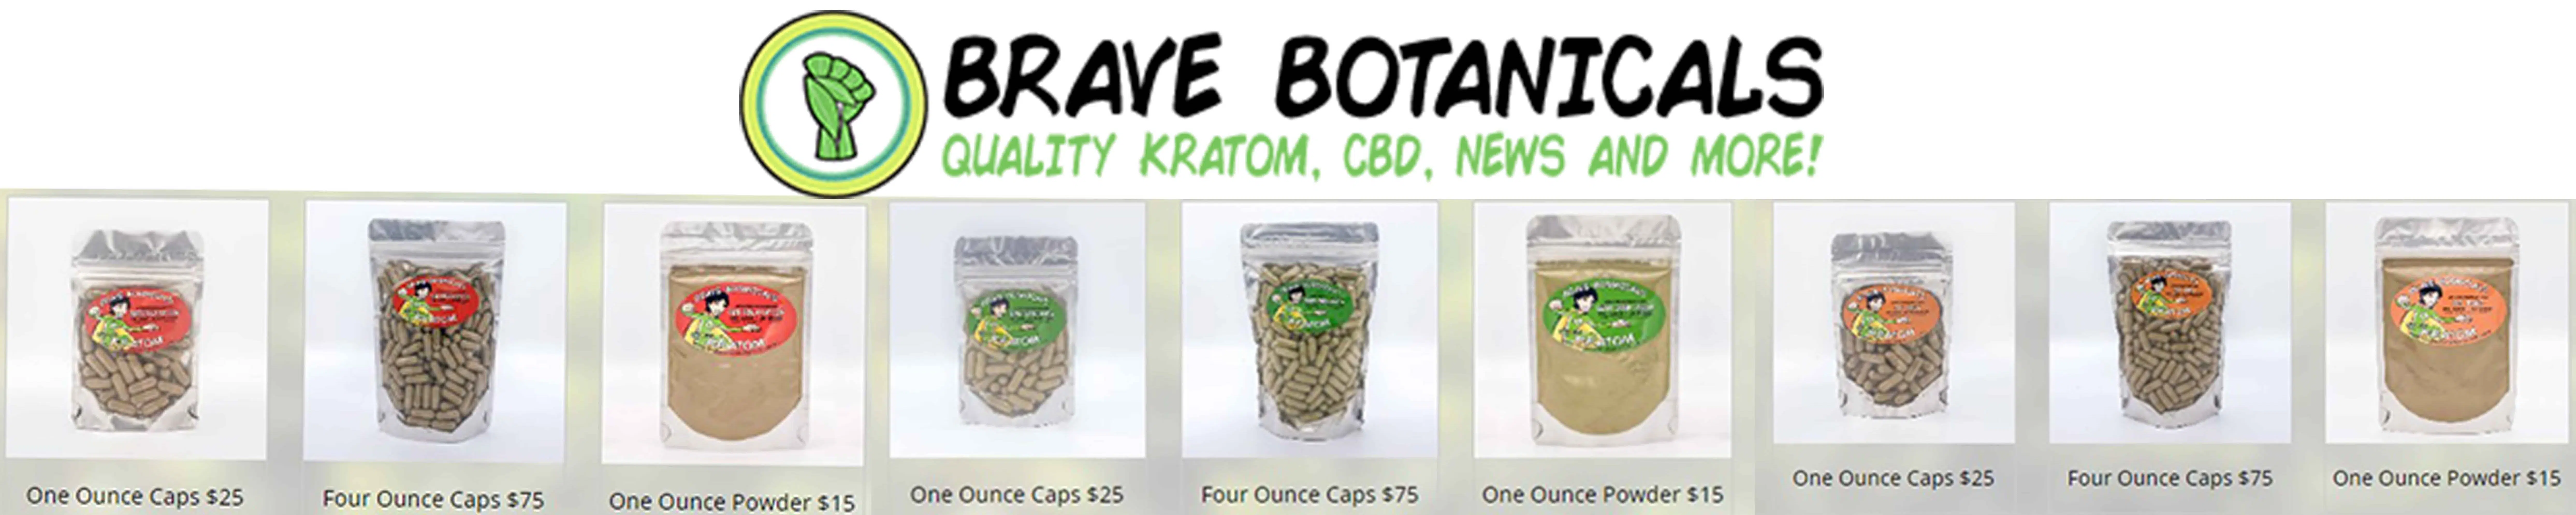 Brave botanicals kratom product lineup with strains and prices